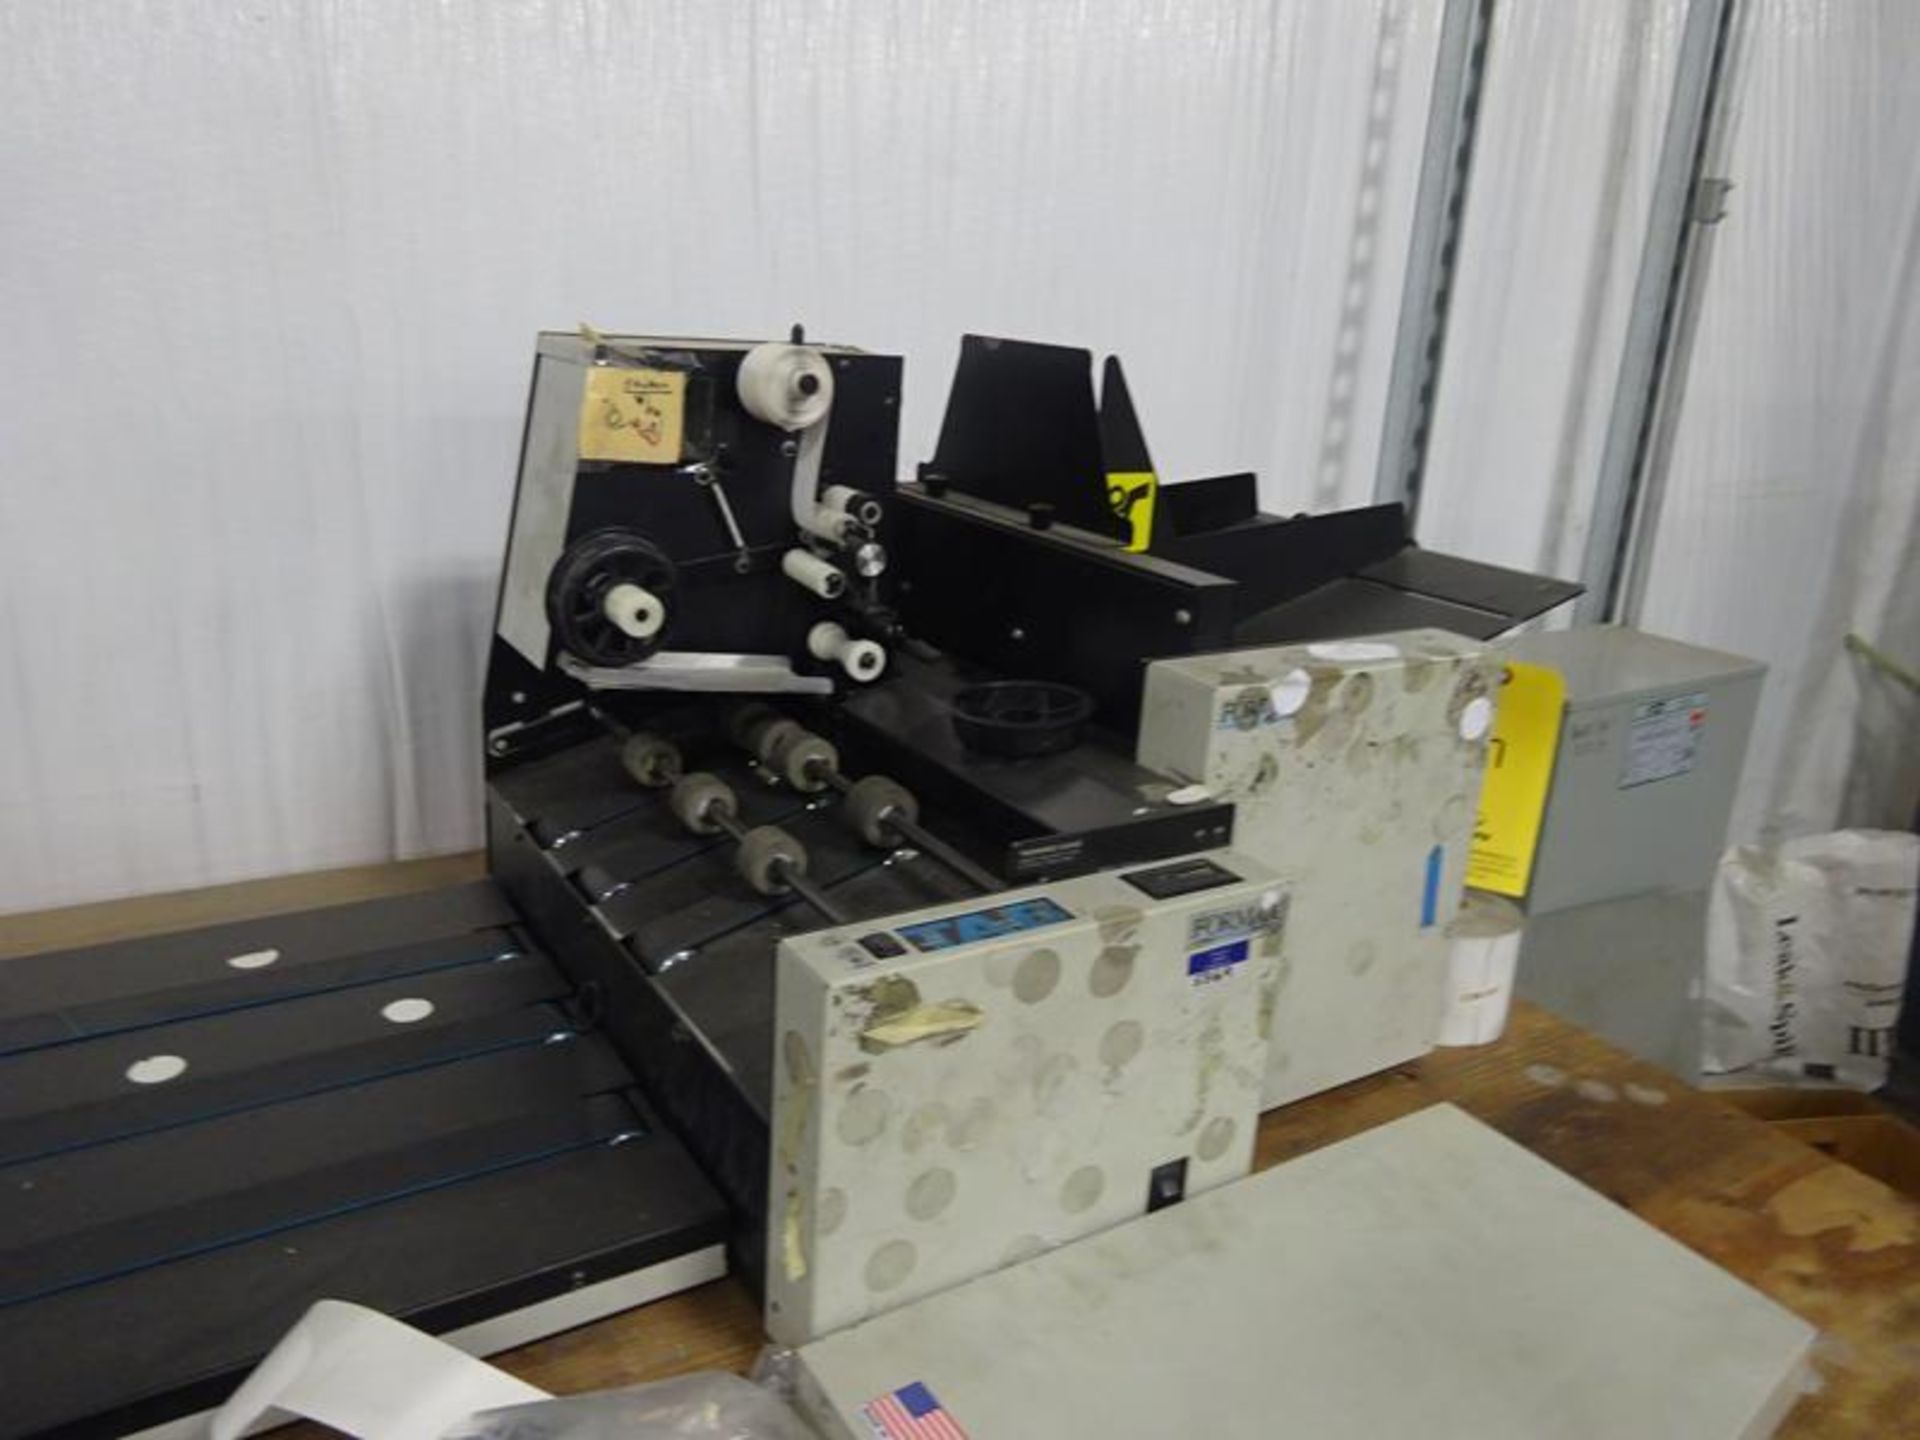 Formax Tabletop Tabber W/ FD 260-10 Feeder, Tabber And Delivery Conveyor - Bild 2 aus 2